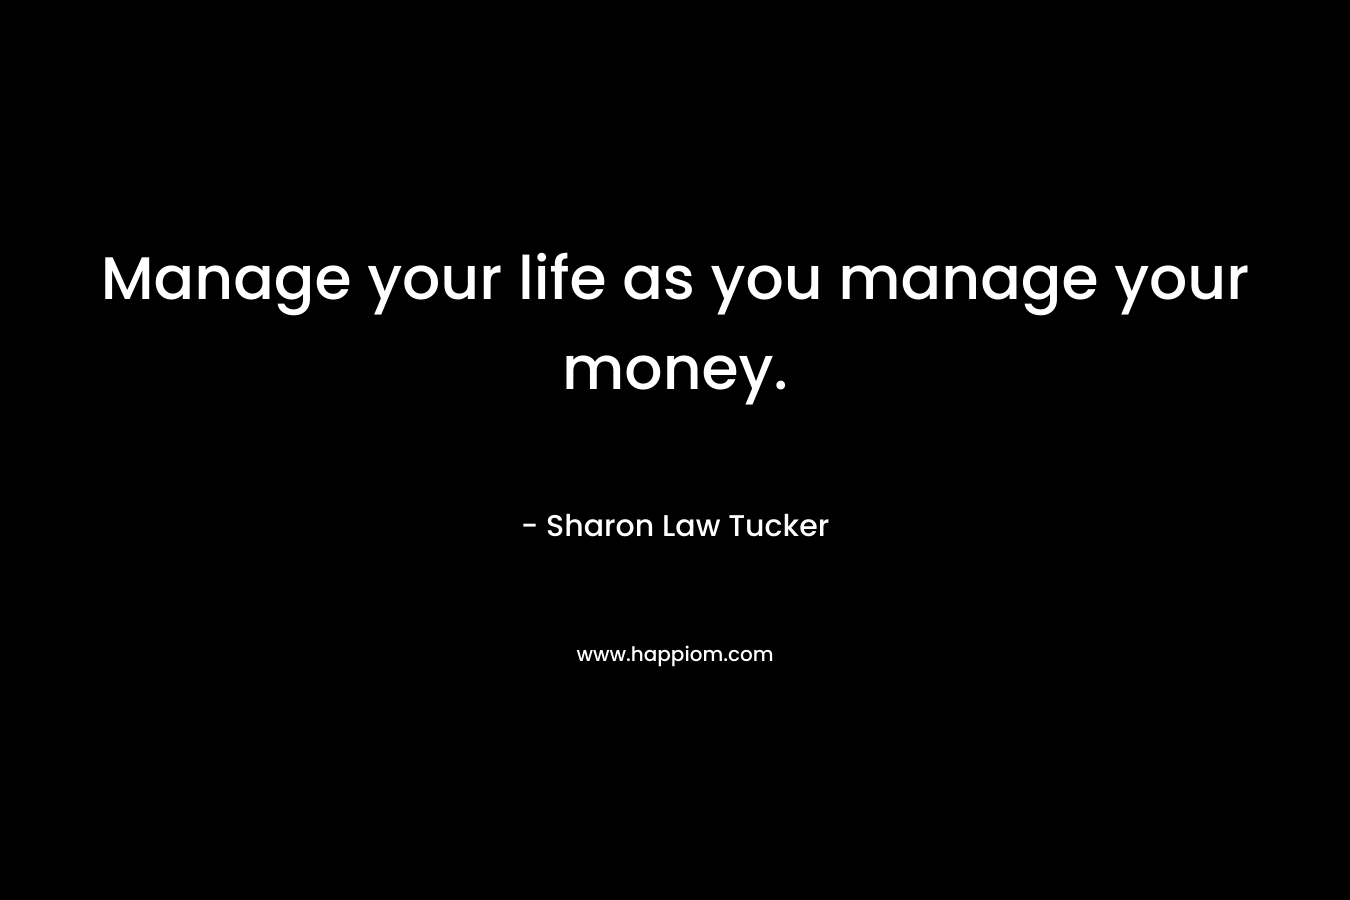 Manage your life as you manage your money.